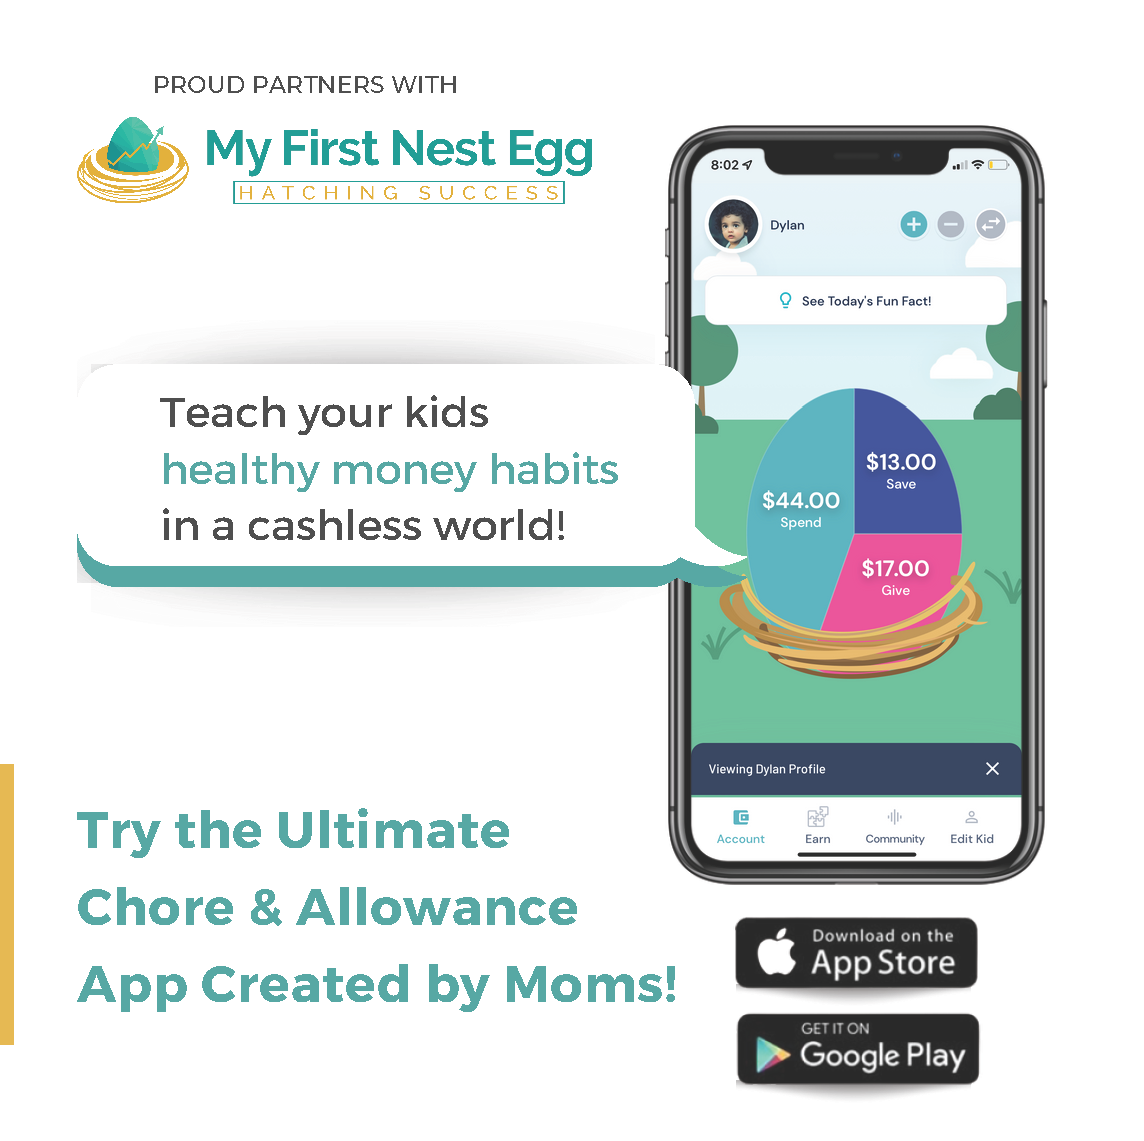 Teach your kids health money habits in a cashless world!